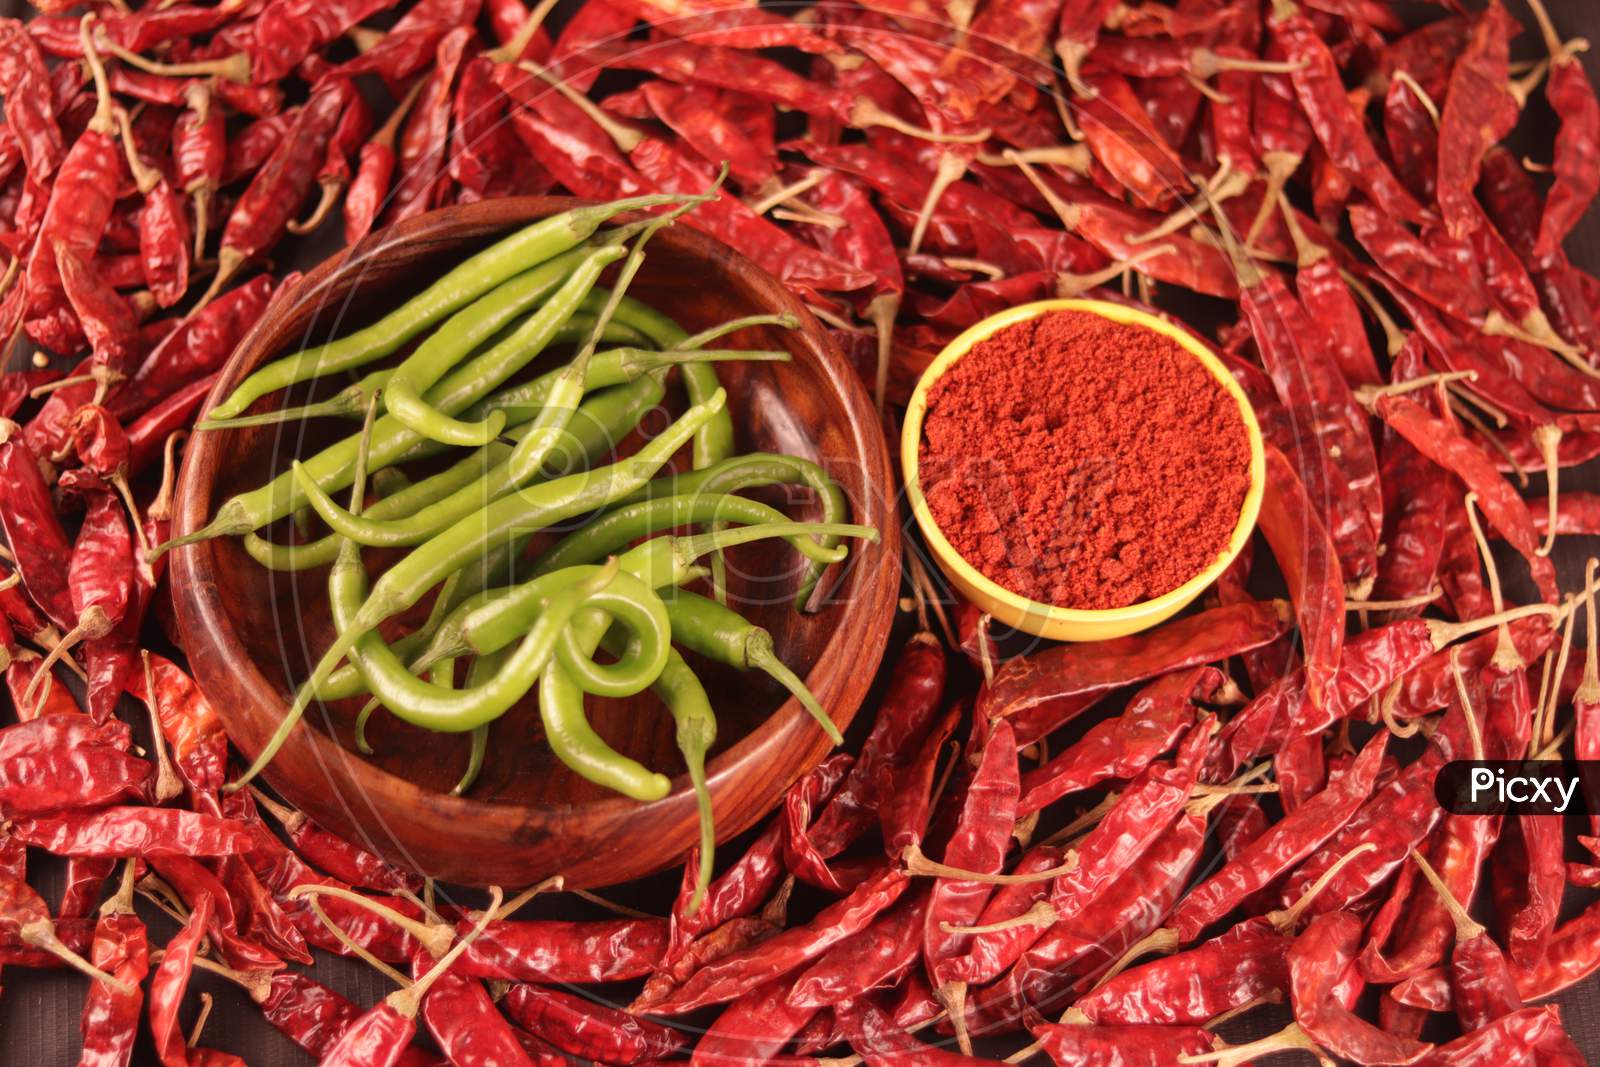 Green Chillies Are Falling In A Wooden Bowl With Chili Pepper Powder And Dried Chili As A Food Background,Mexican Hot Chili Pepper,